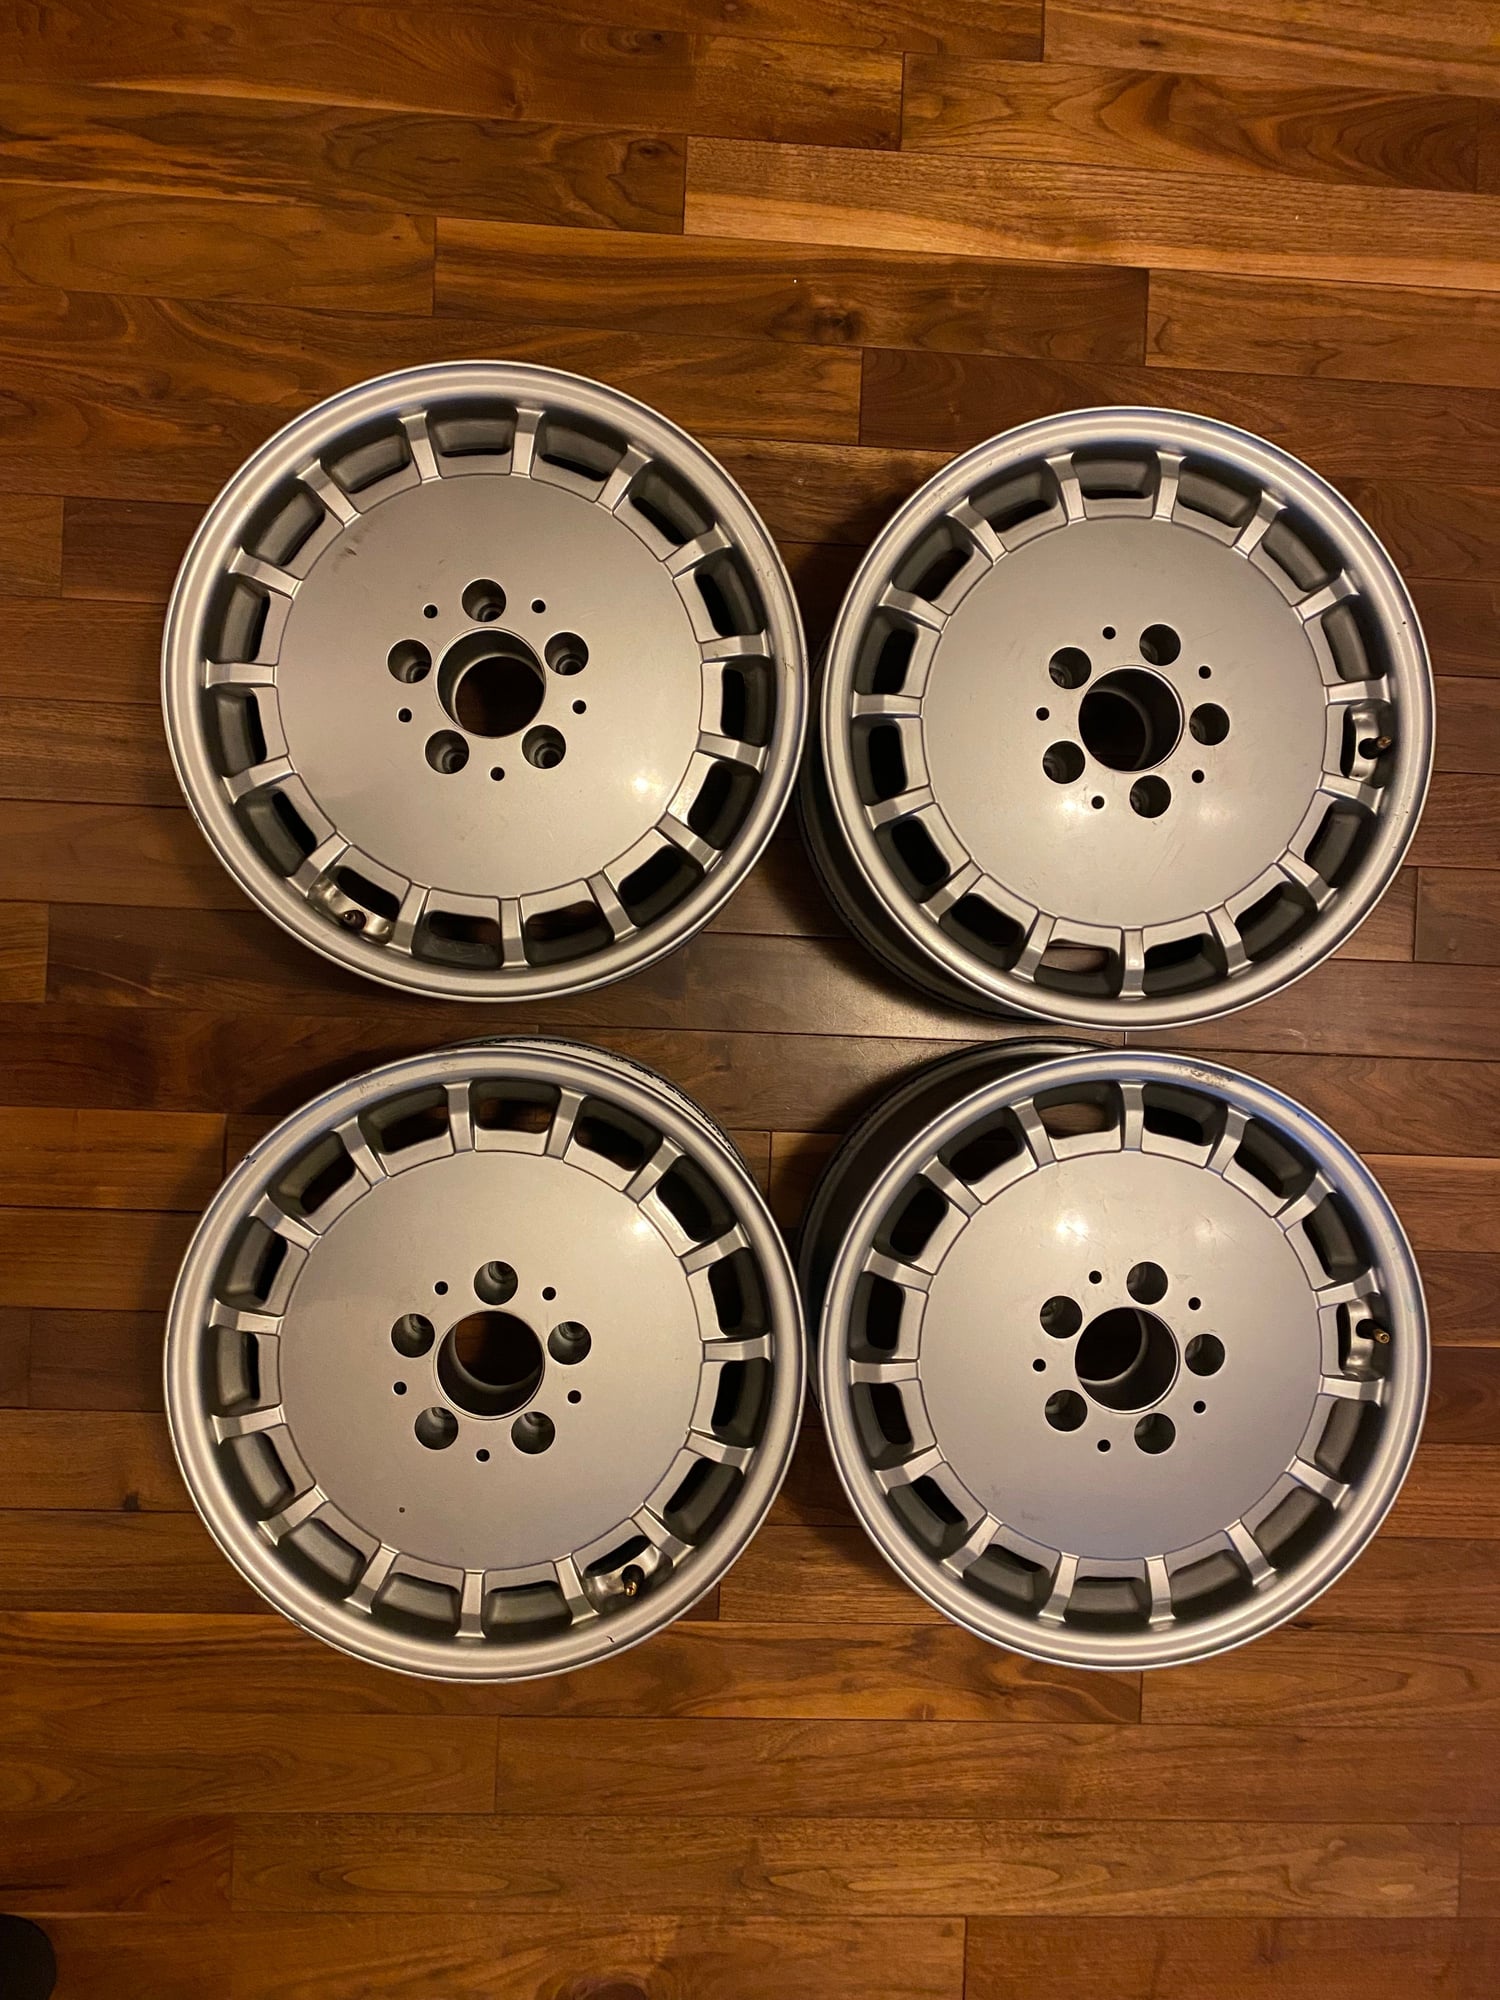 Wheels and Tires/Axles - A set of four (4) rims - Used - 1989 to 2001 Mercedes-Benz 500SL - Calgary, AB T3H5Z1, Canada